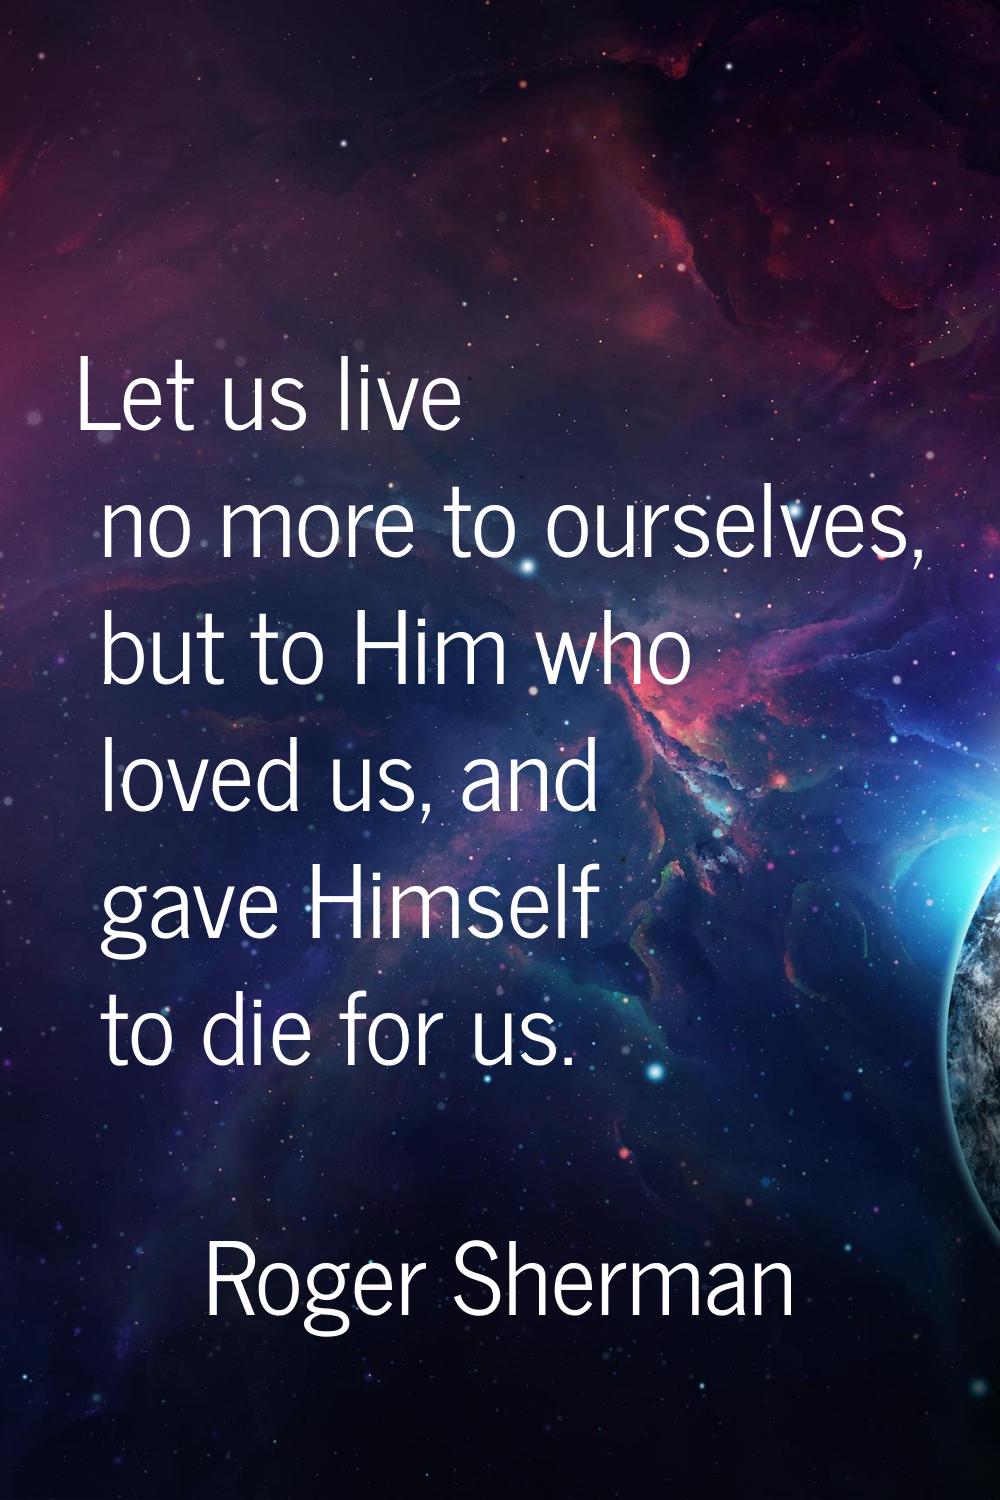 Let us live no more to ourselves, but to Him who loved us, and gave Himself to die for us.